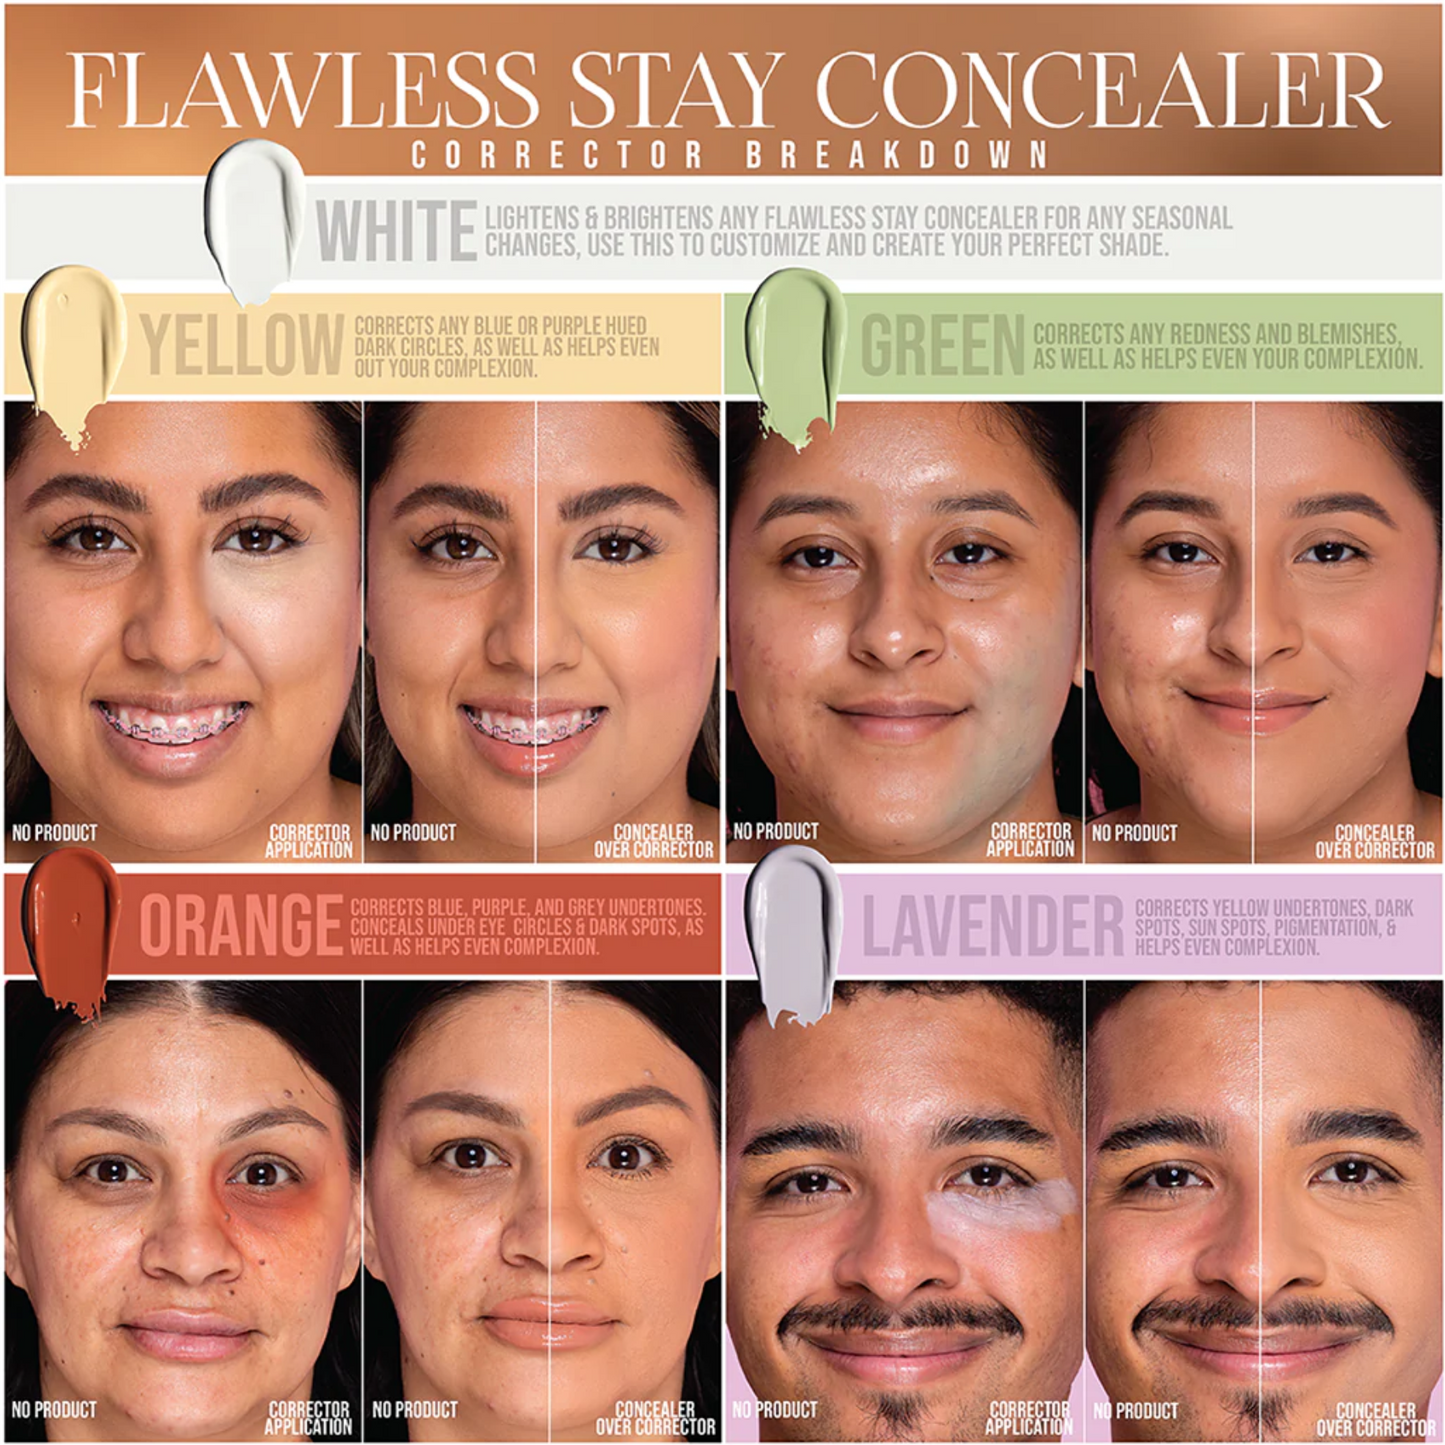 Corrector FLAWLESS STAY CONCEALER BEAUTY CREATIONS